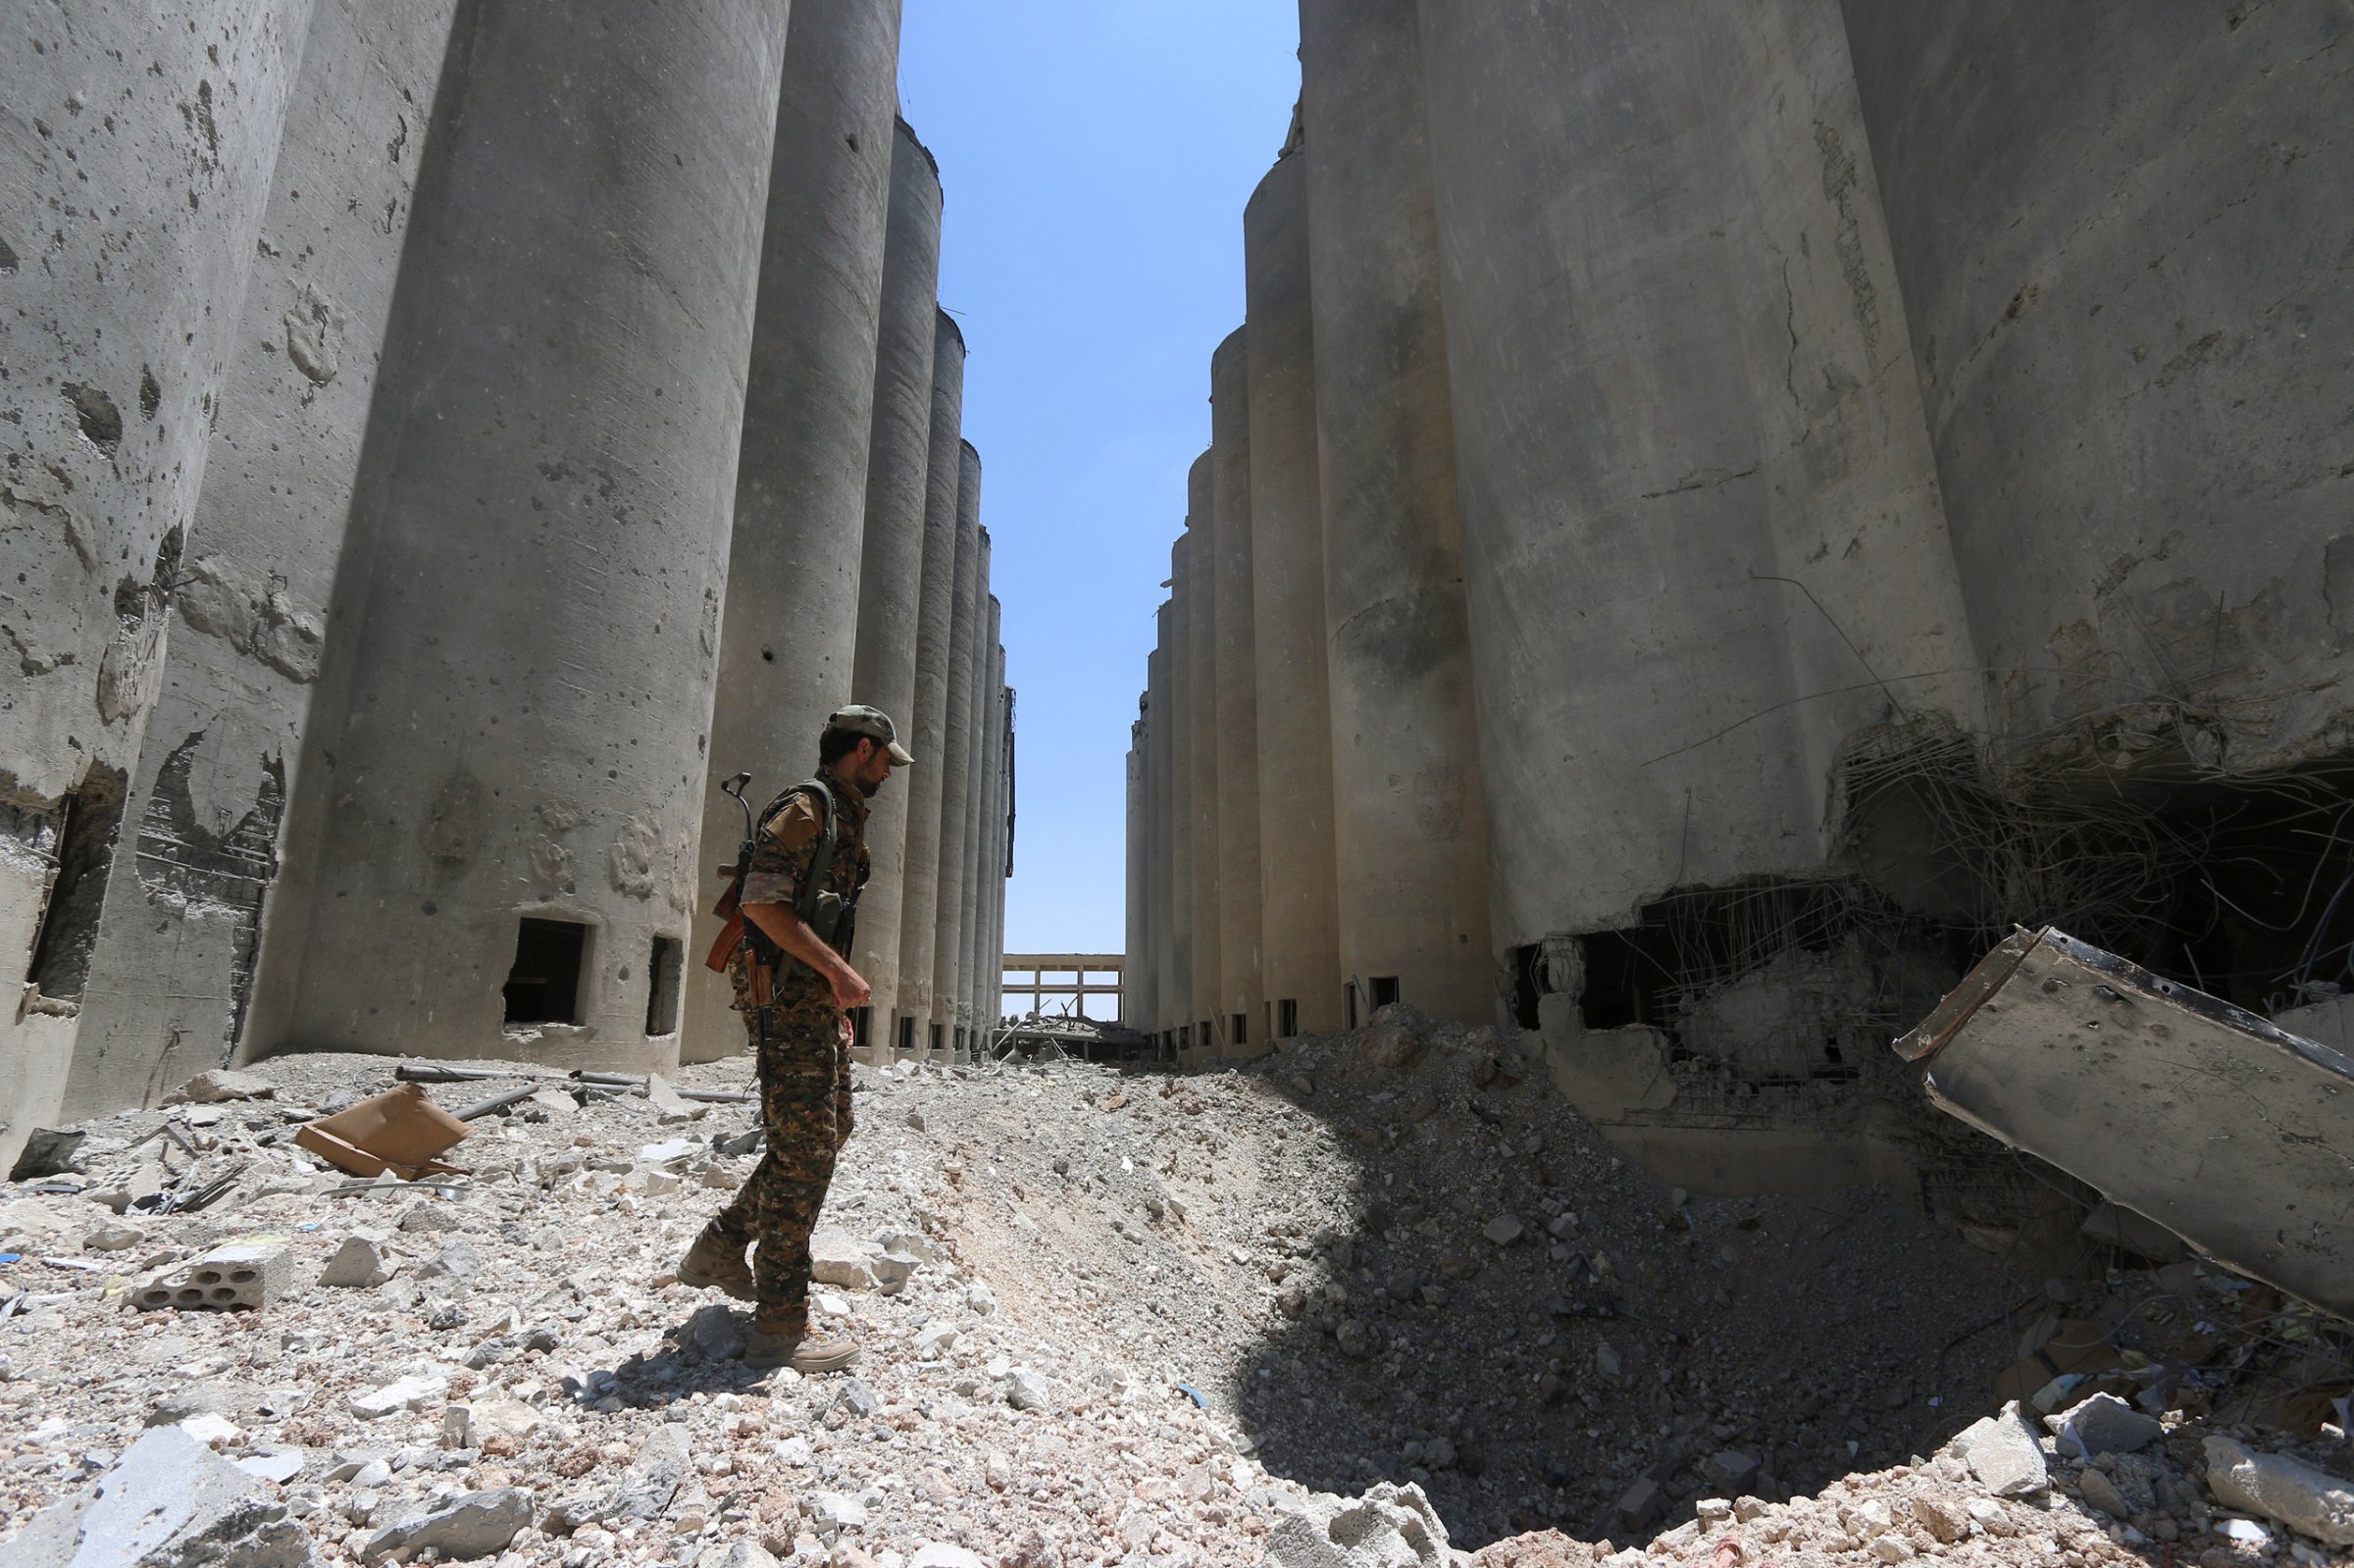 A Syria Democratic Forces (SDF) fighter walks in the silos and mills of Manbij after the SDF took control of it, in Aleppo Governorate, Syria on July 1, 2016.